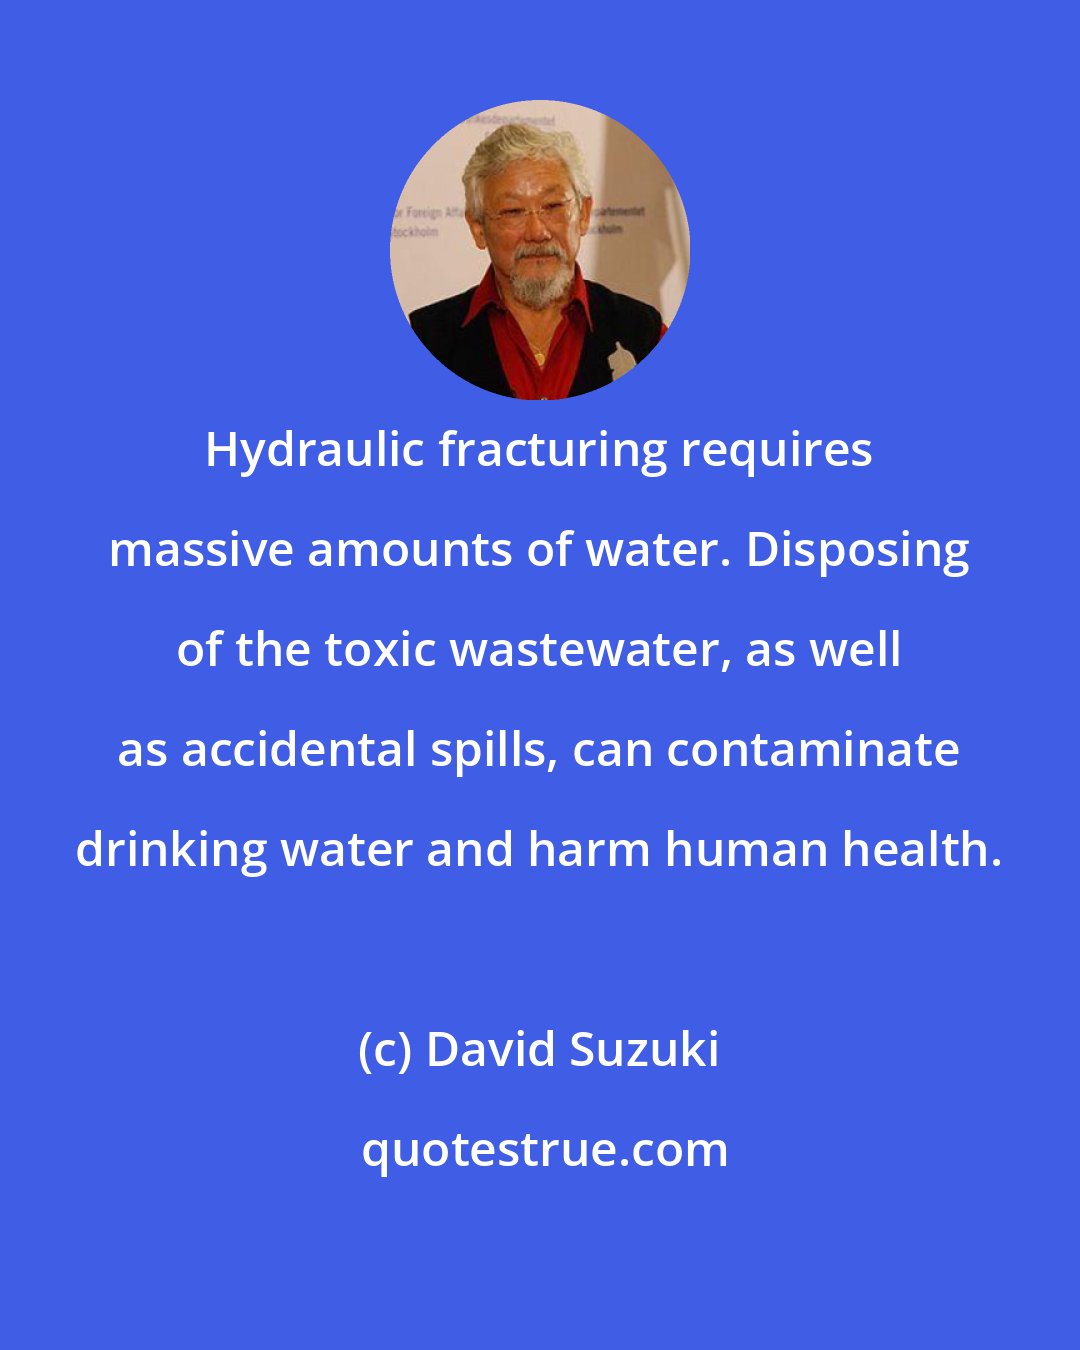 David Suzuki: Hydraulic fracturing requires massive amounts of water. Disposing of the toxic wastewater, as well as accidental spills, can contaminate drinking water and harm human health.